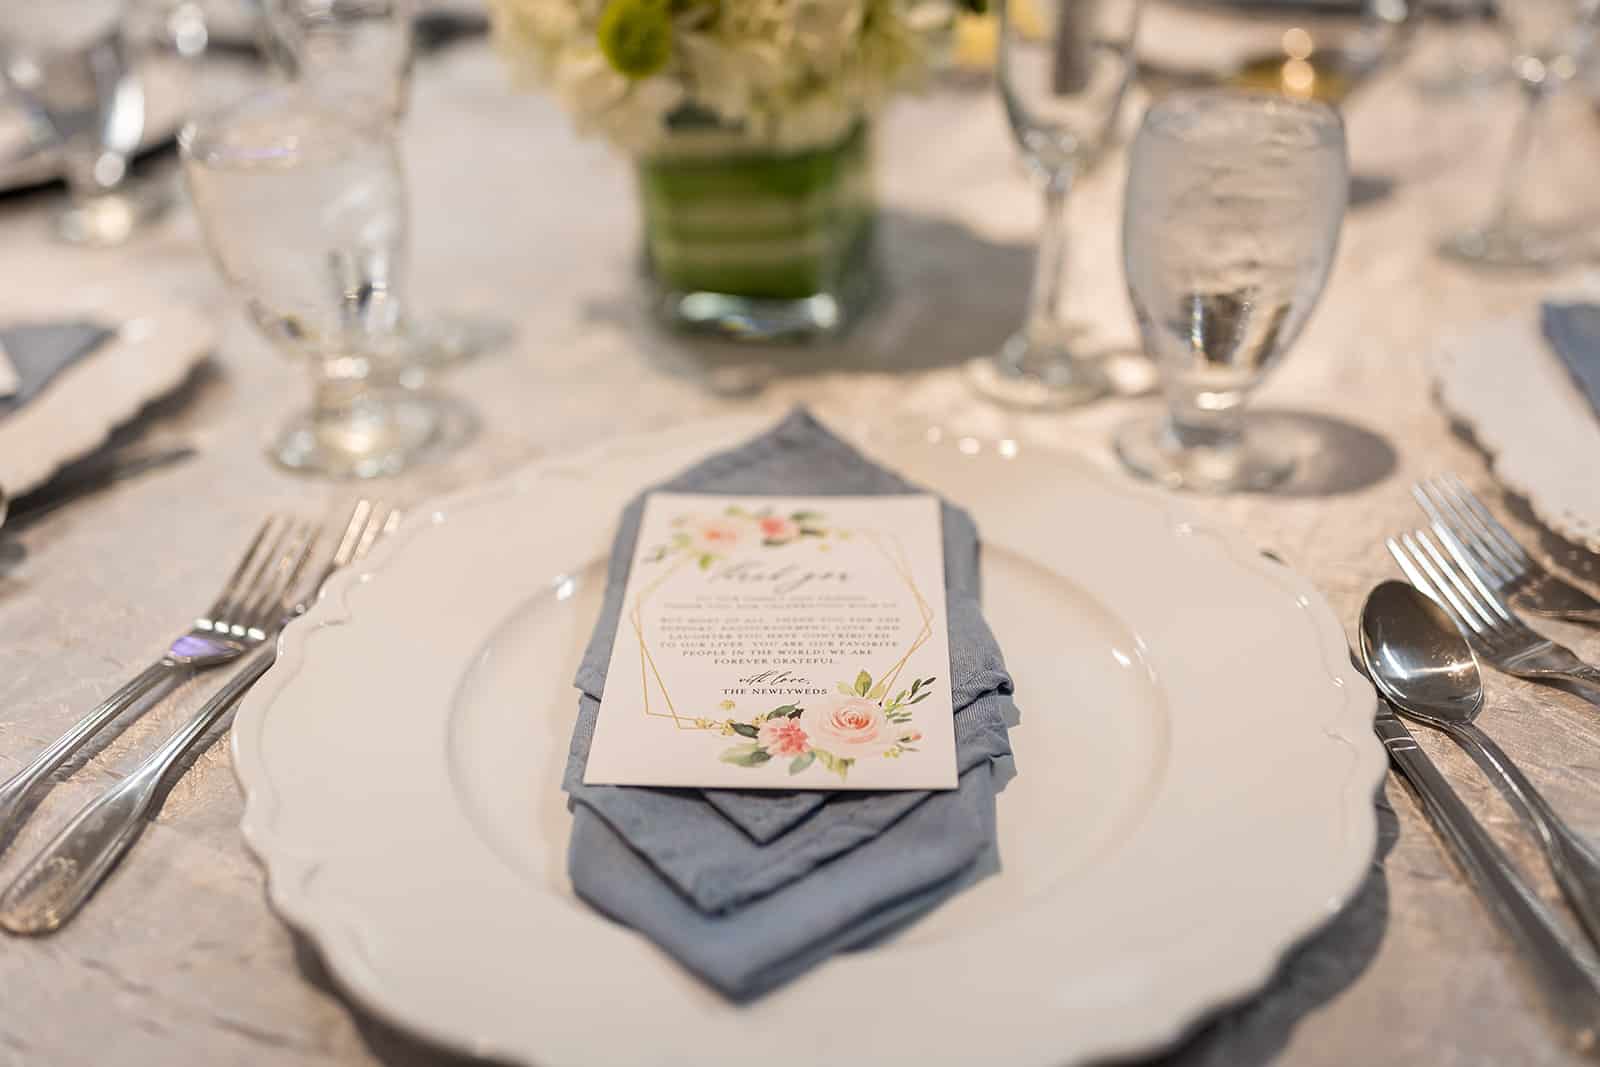 wedding reception dinner setting with a white plate, silver flatware, dusty blue napkins and a thank you card